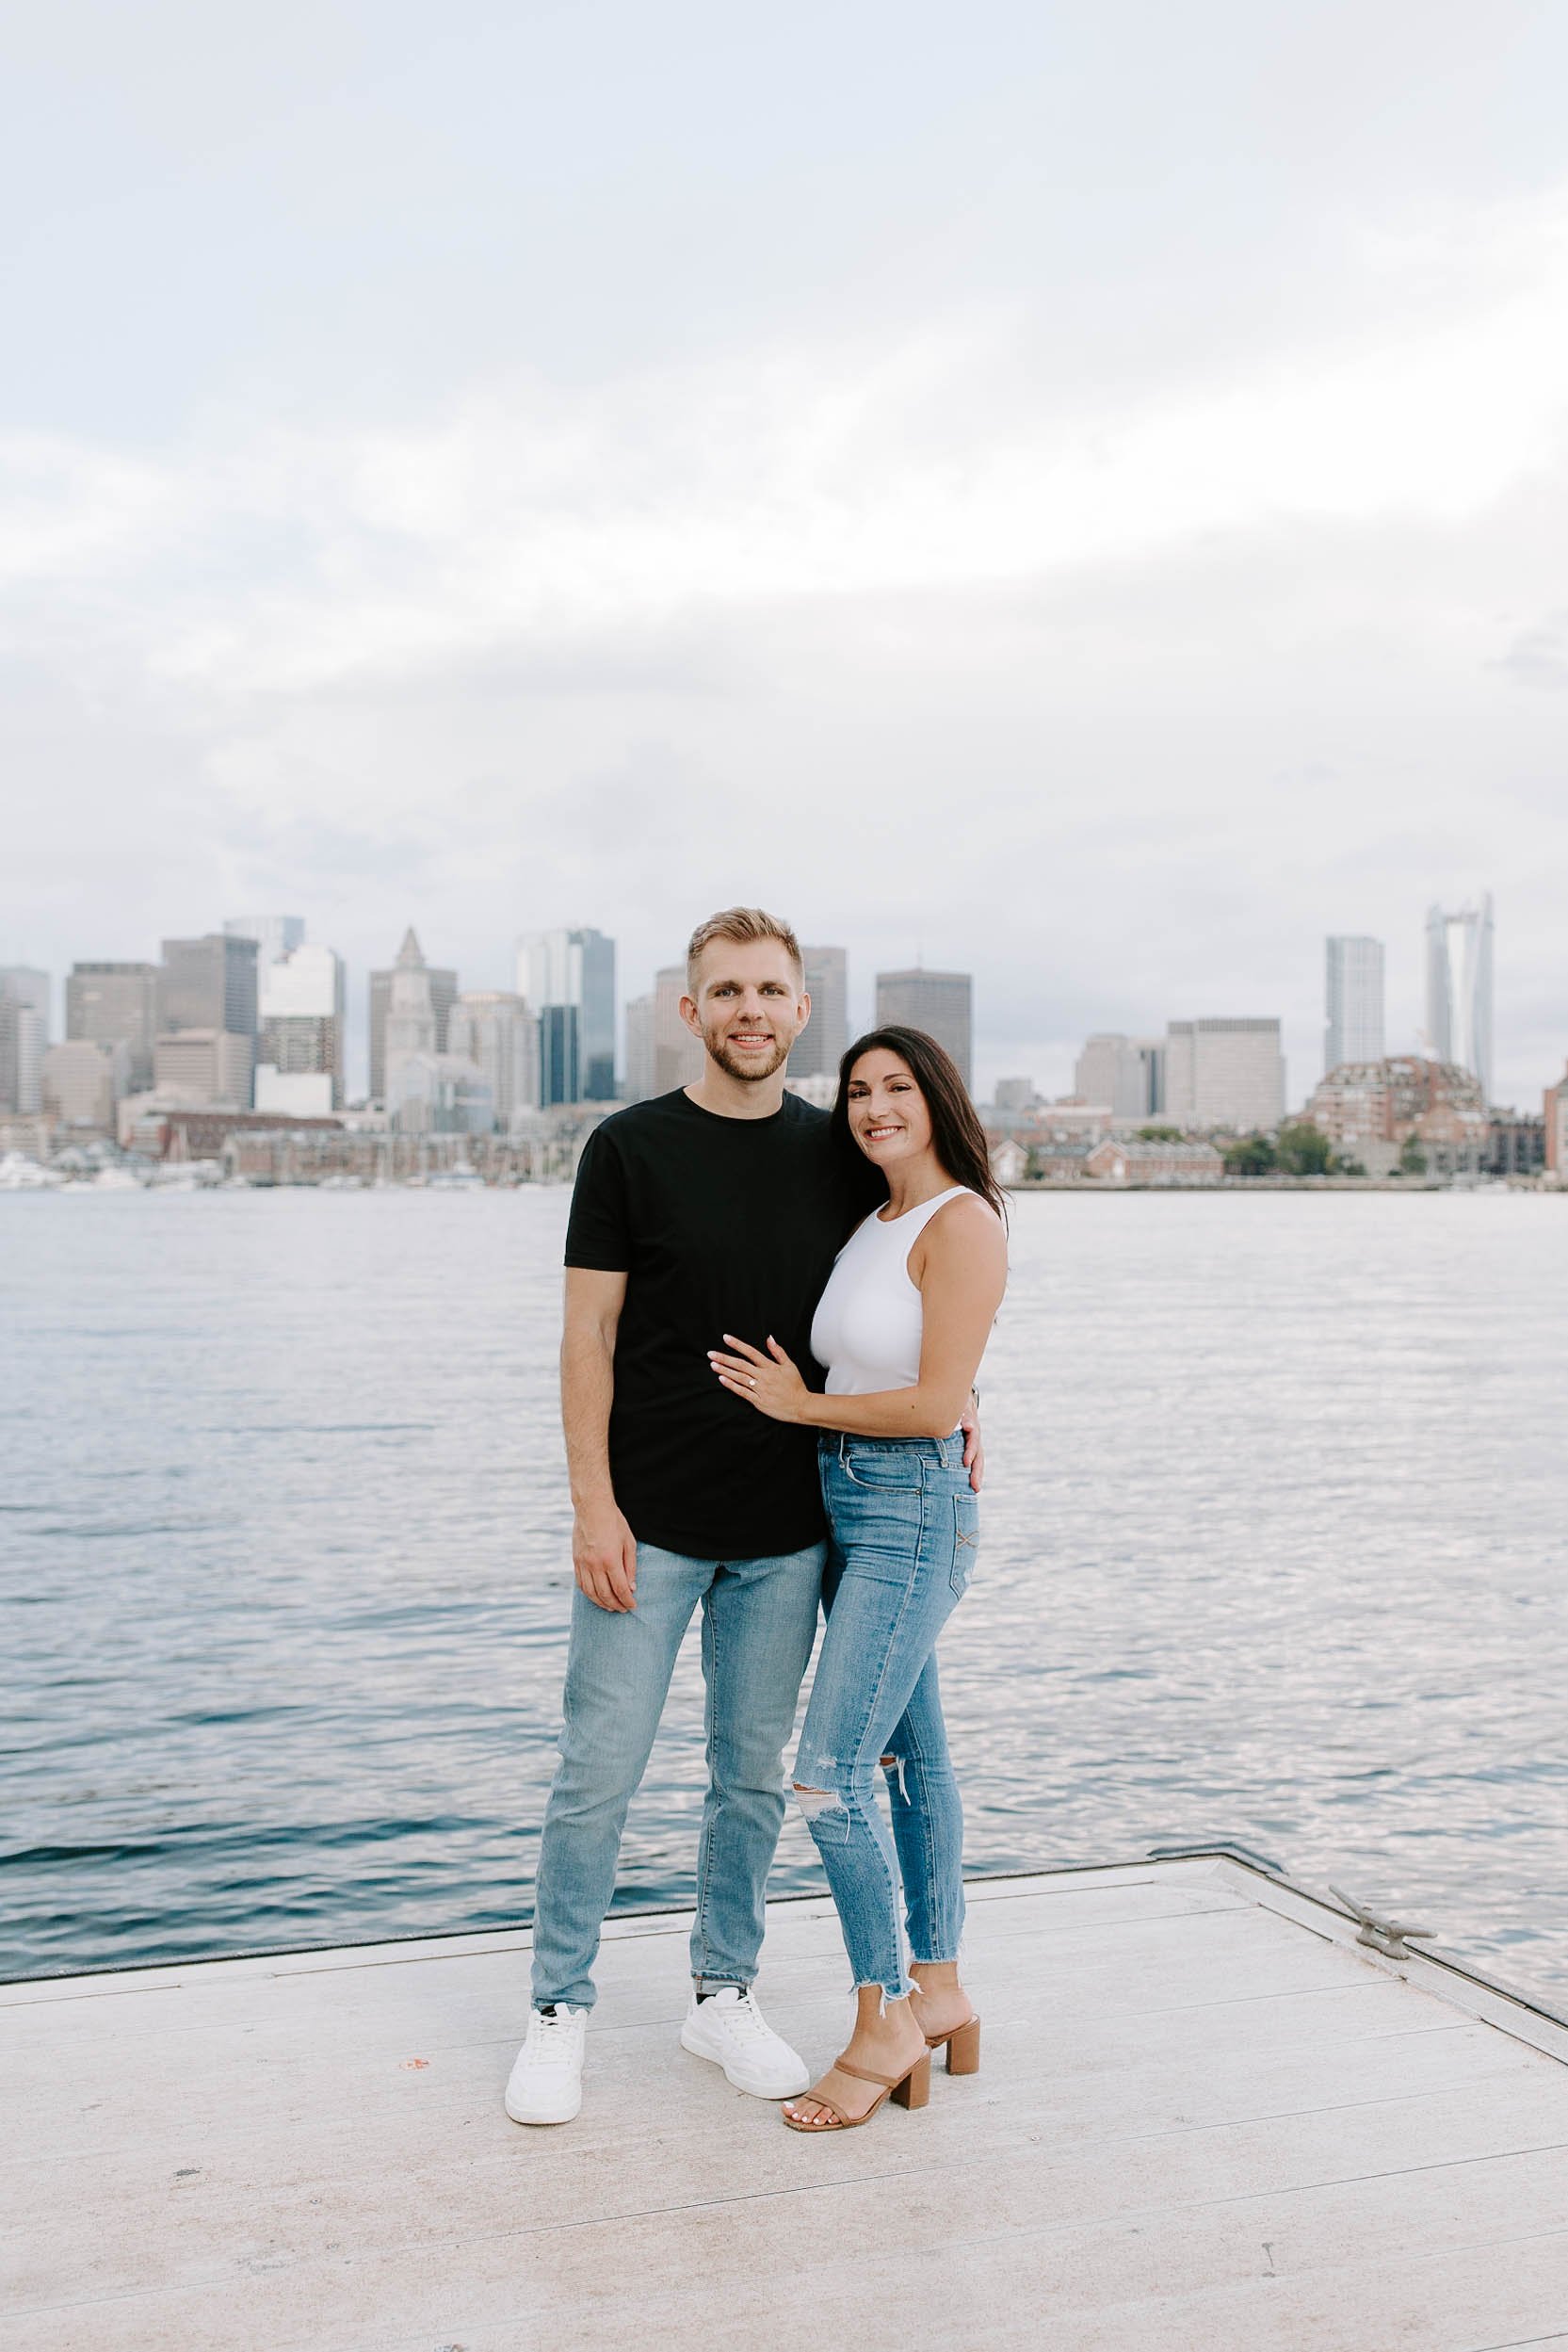  Engaged couple smiling standing in front of skyline view  